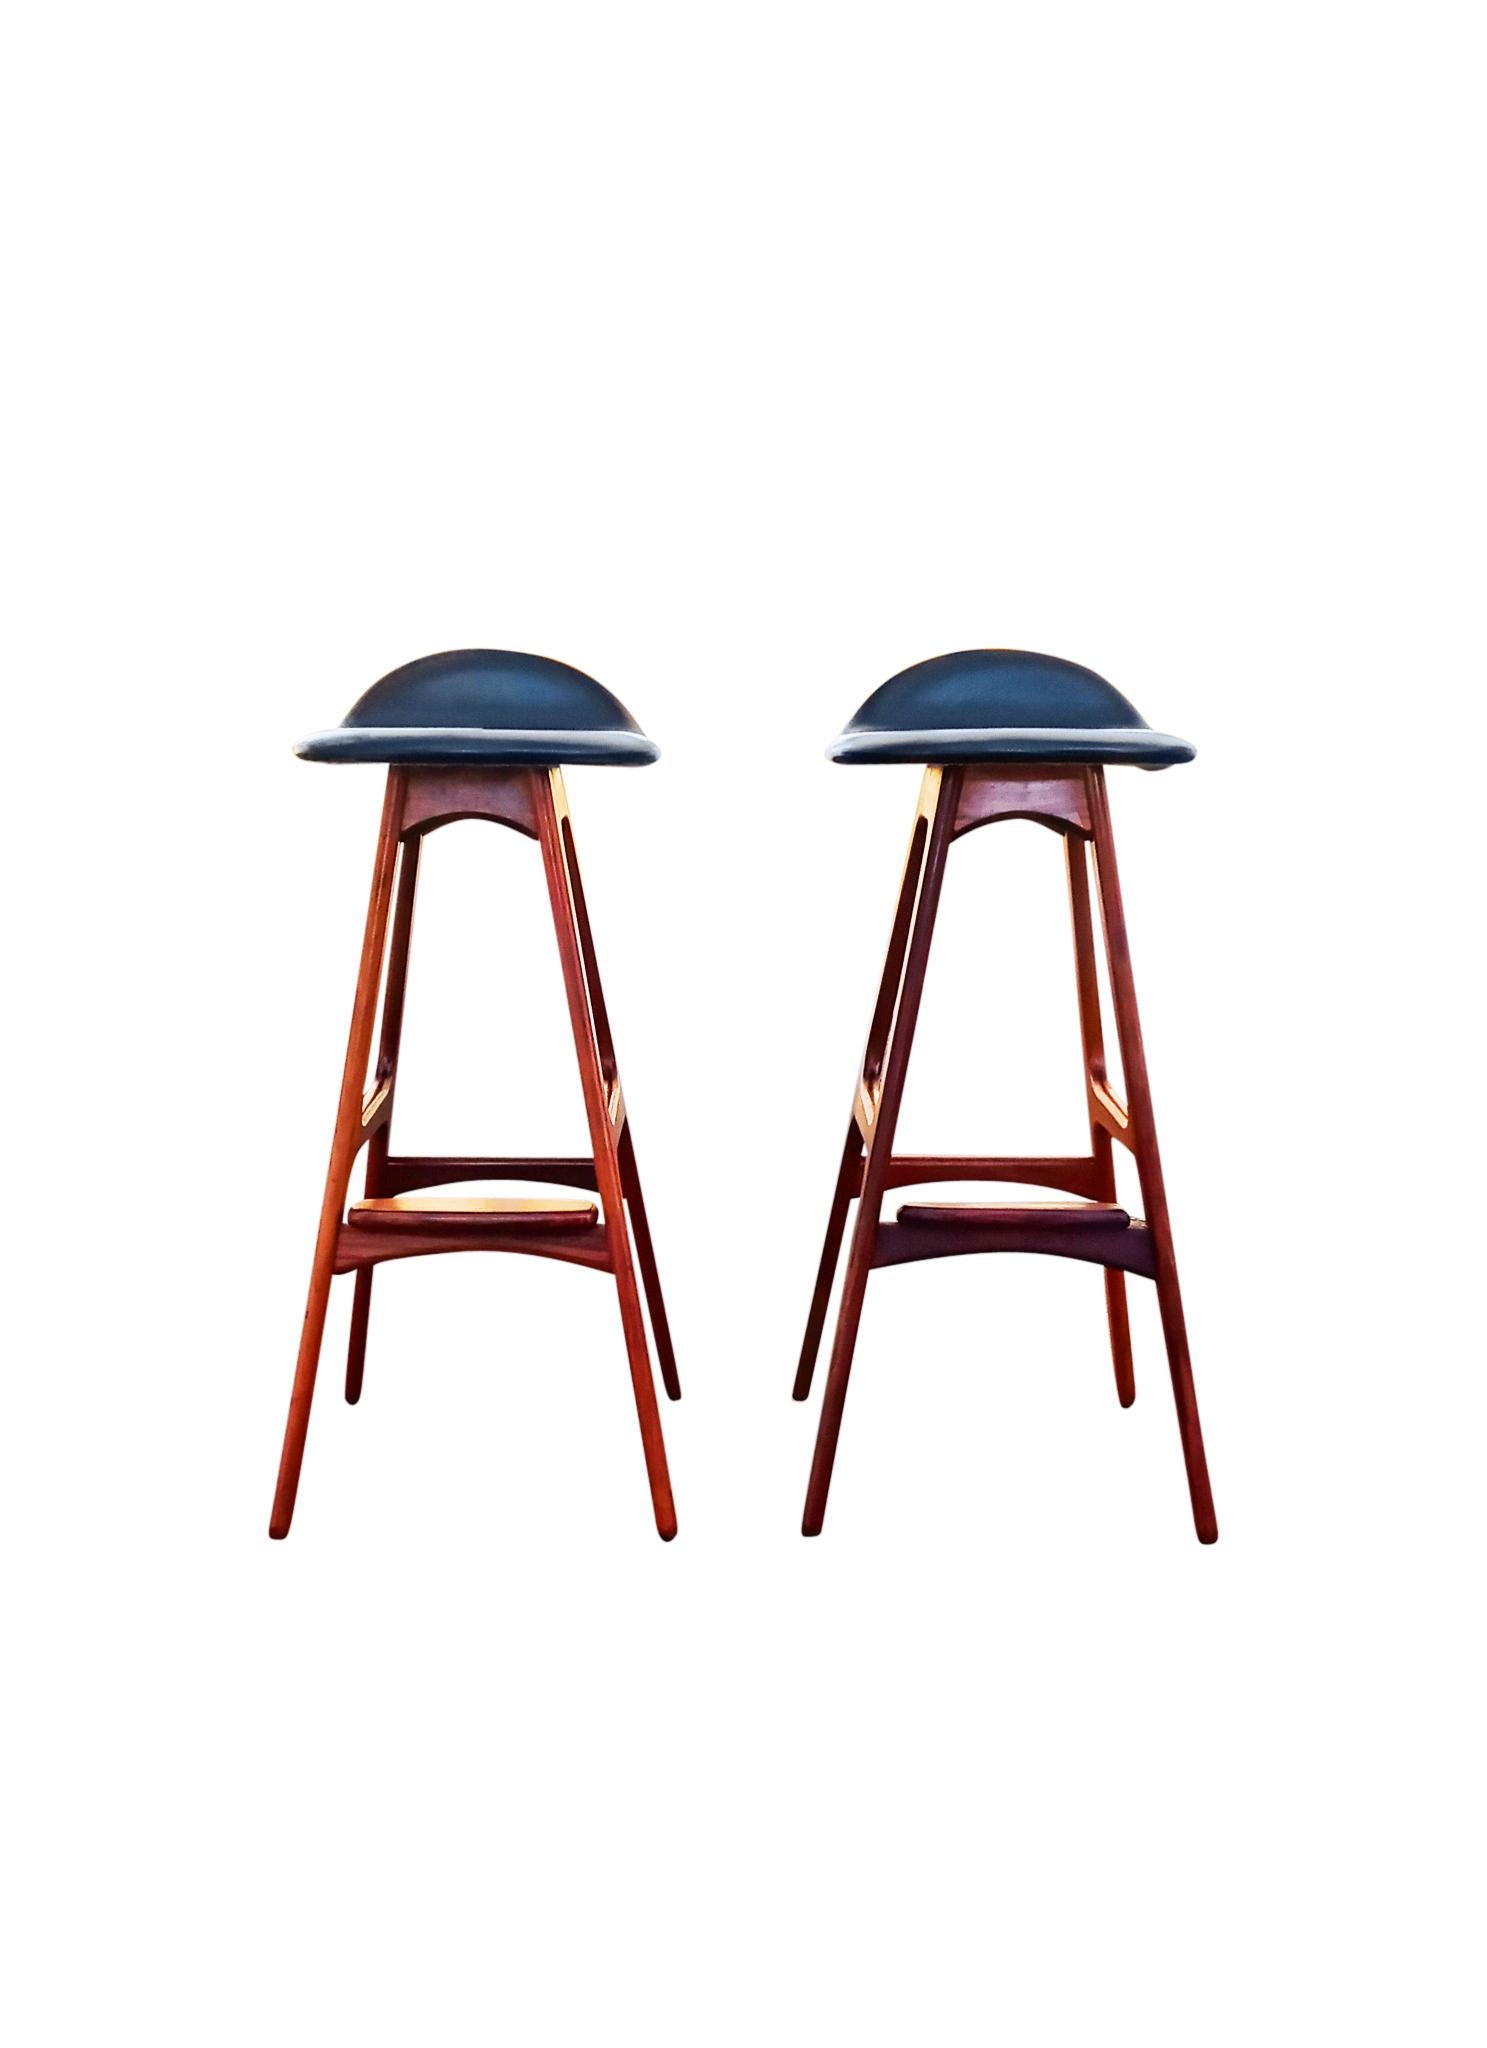 Beautiful pair of bar stools model OD61 by the Danish designer Erik Buck (Buch) and manufactured by OD Mobler, 1960s. A sculptural, elegant, and comfortable pair of barstools. Frames are rosewood and seats are upholstered in black leather. Good